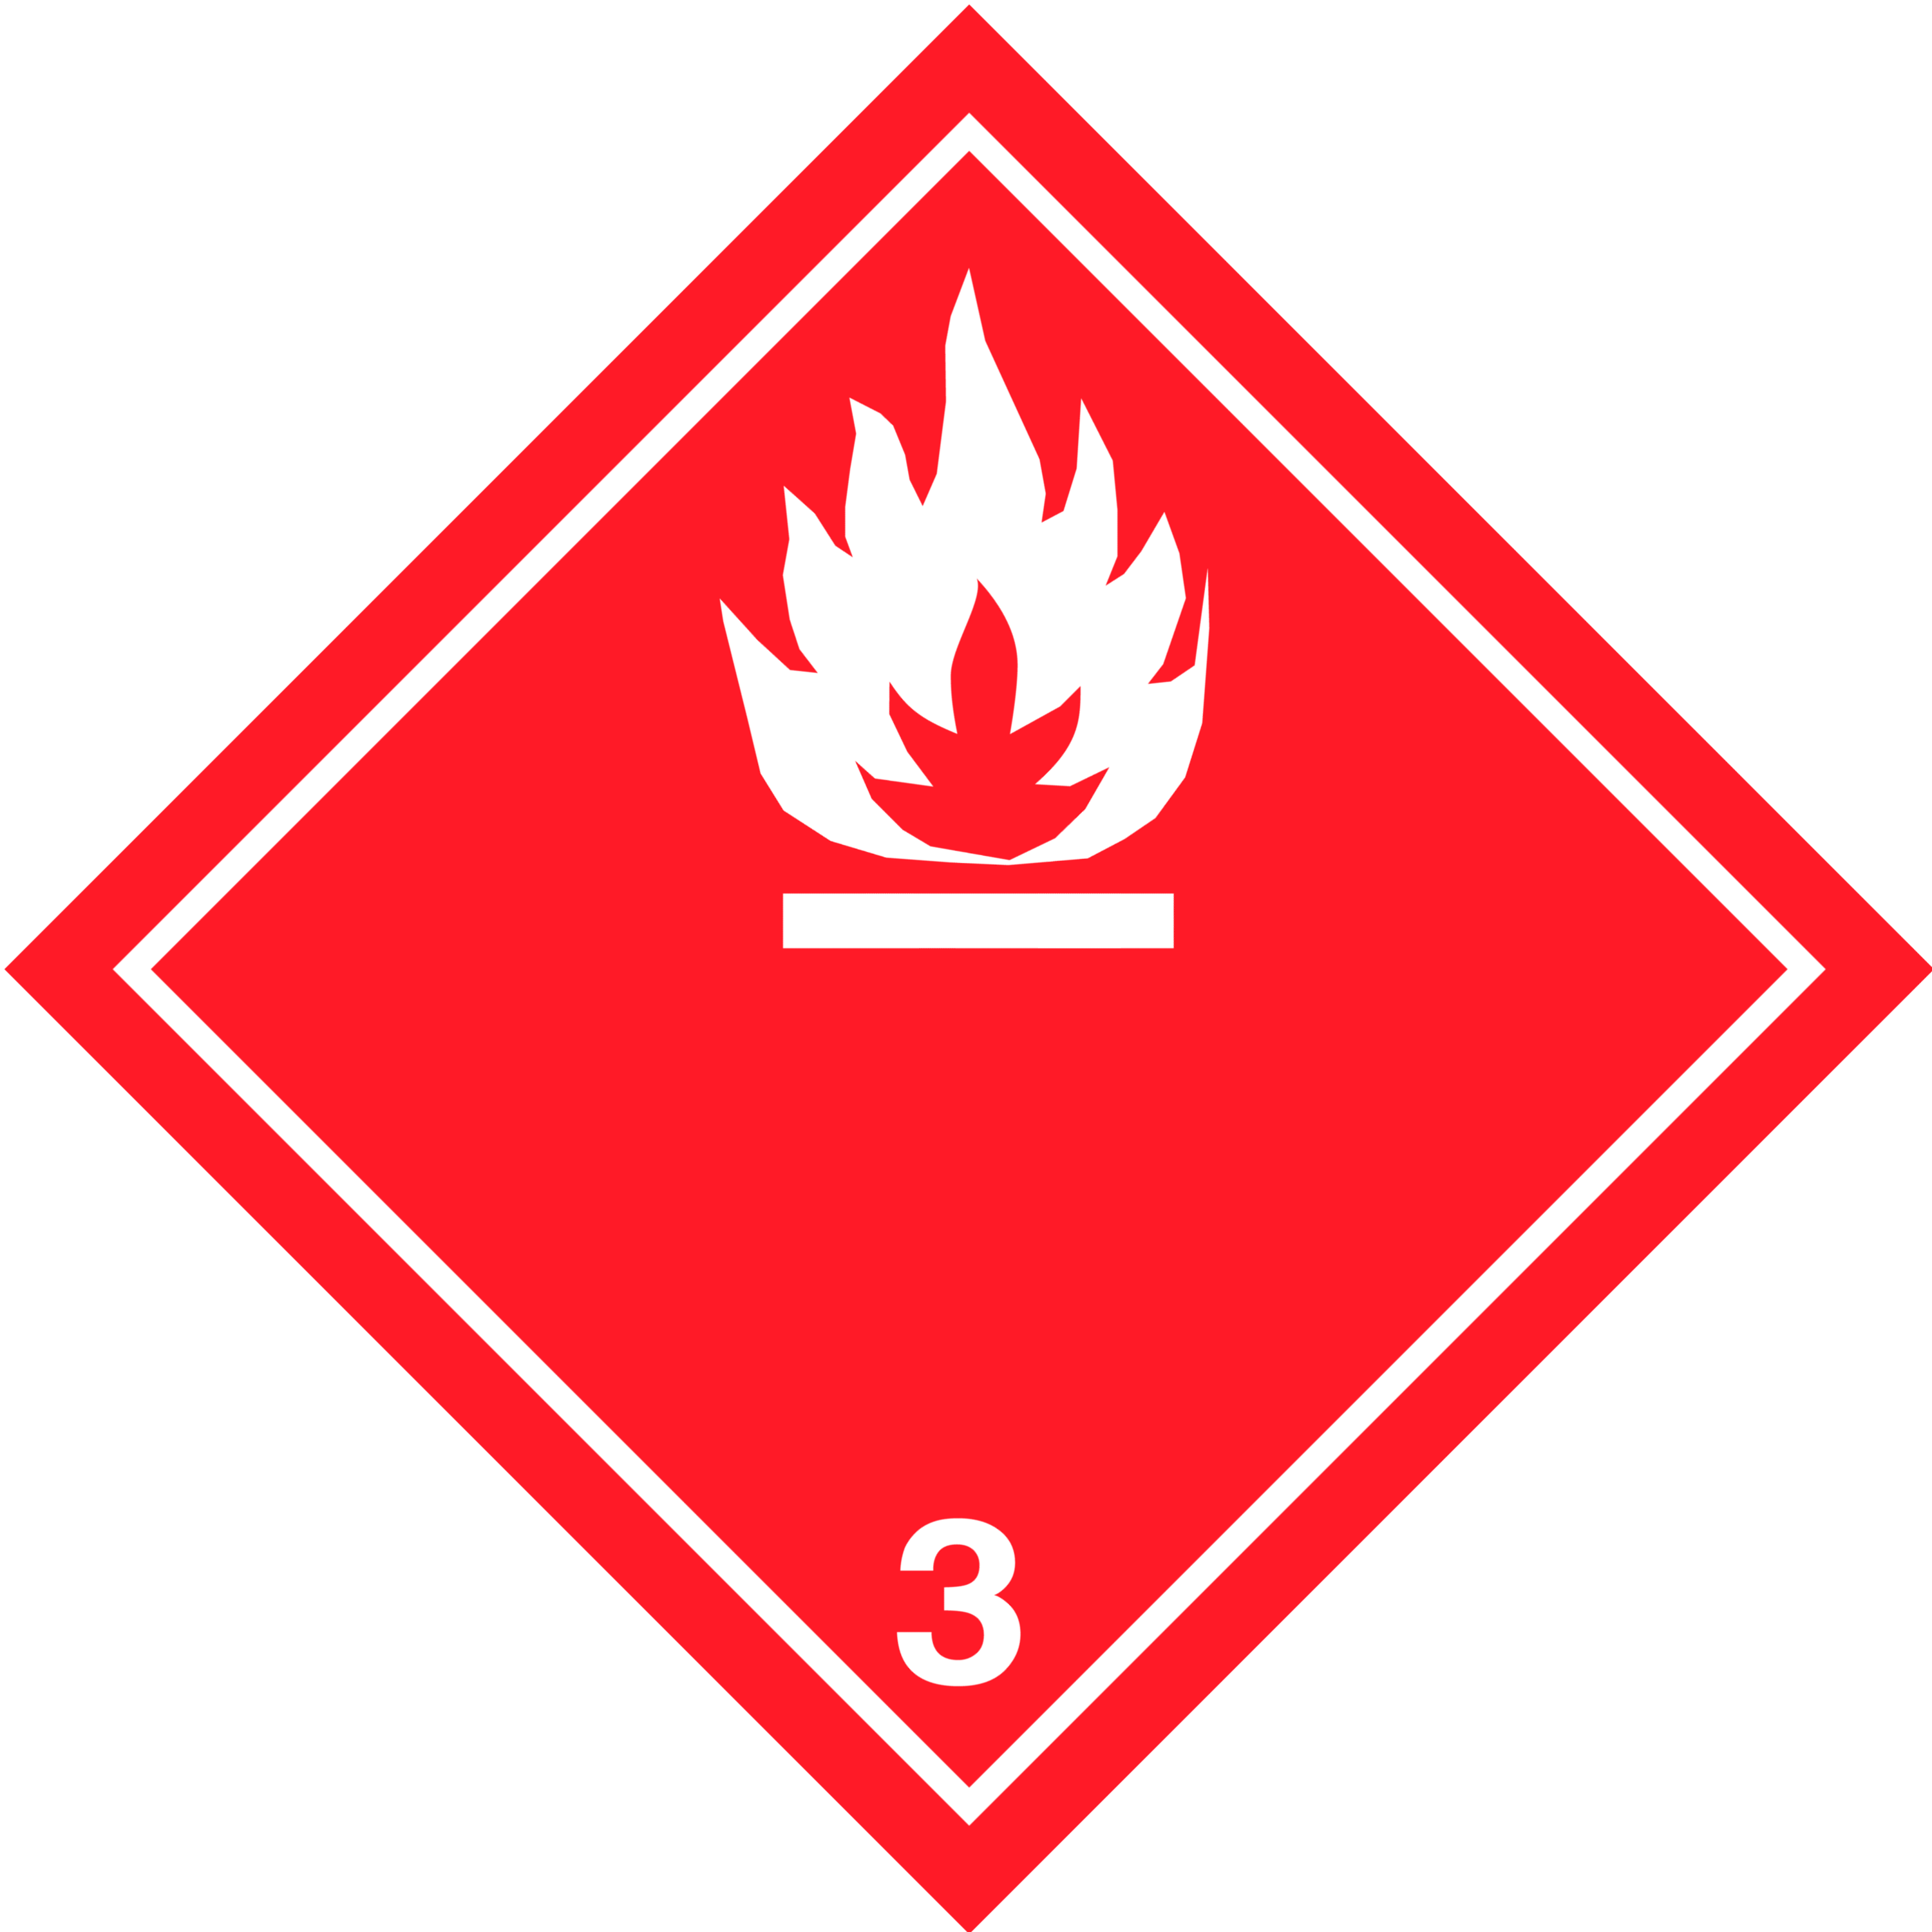 Flammable Sign Transparent Image